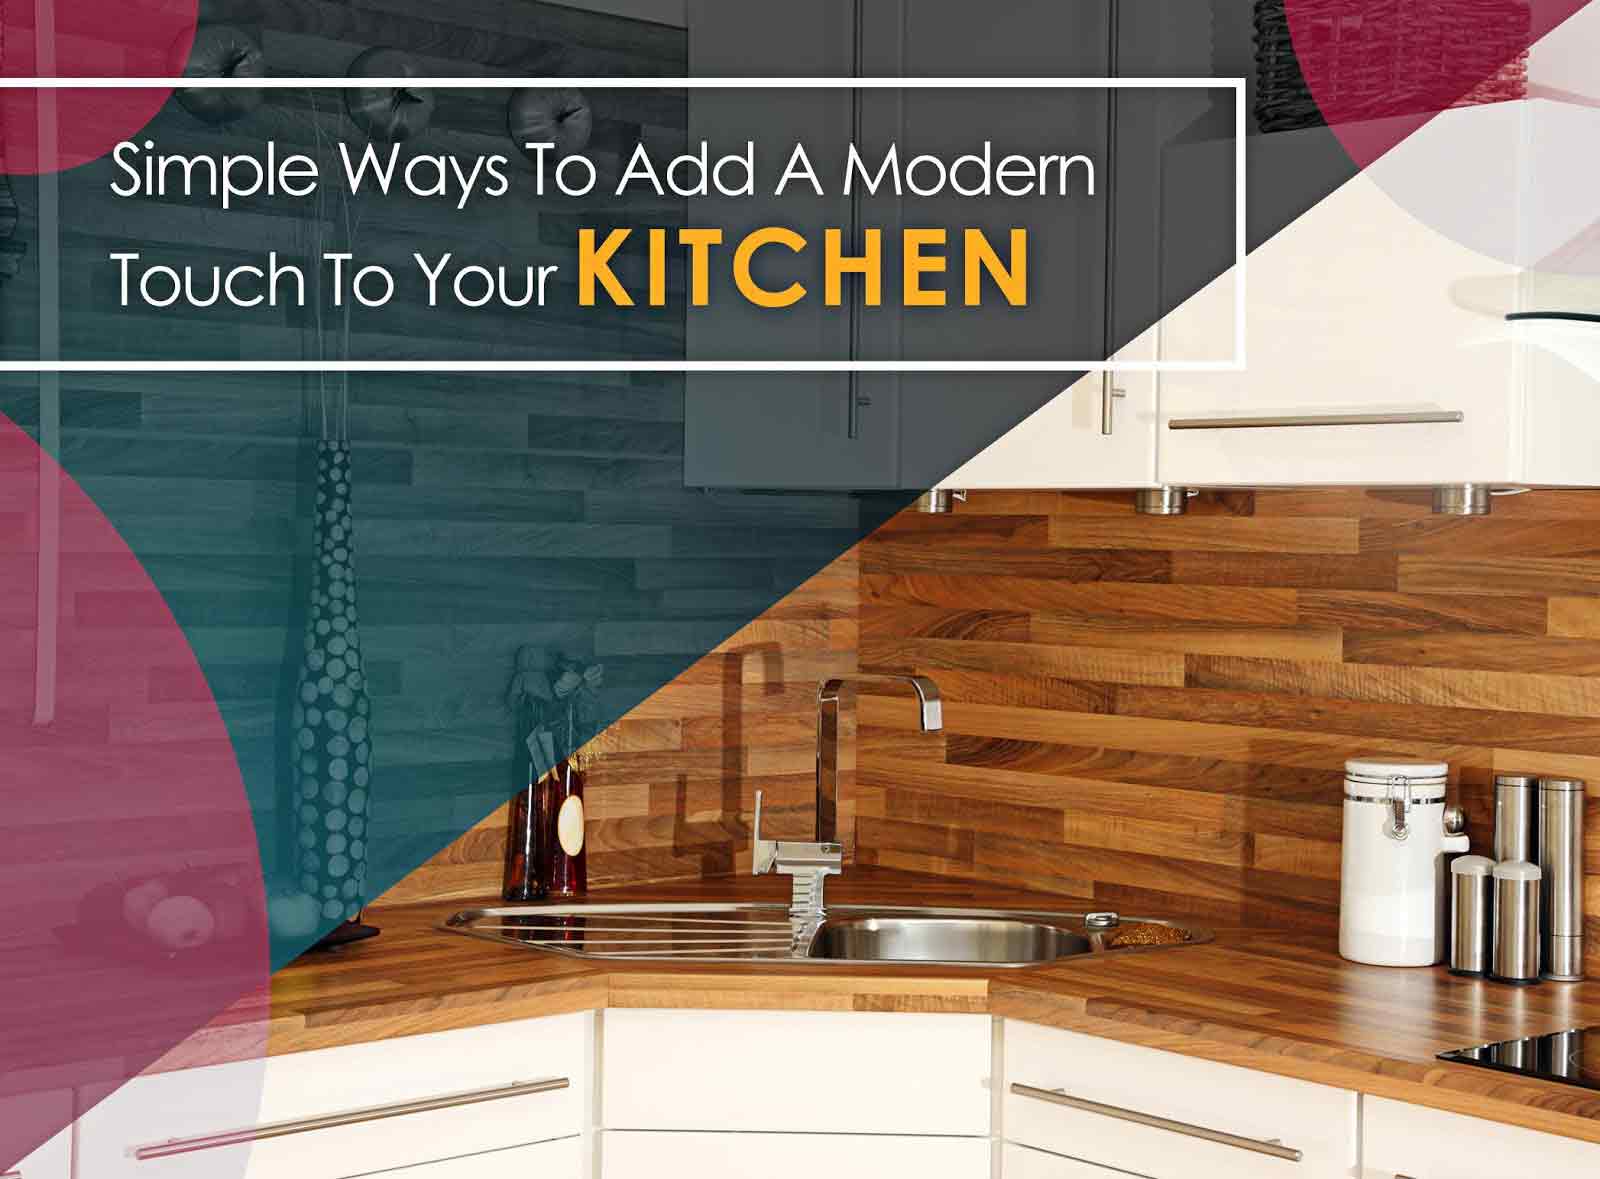 Simple Ways to Add a Modern Touch to Your Kitchen